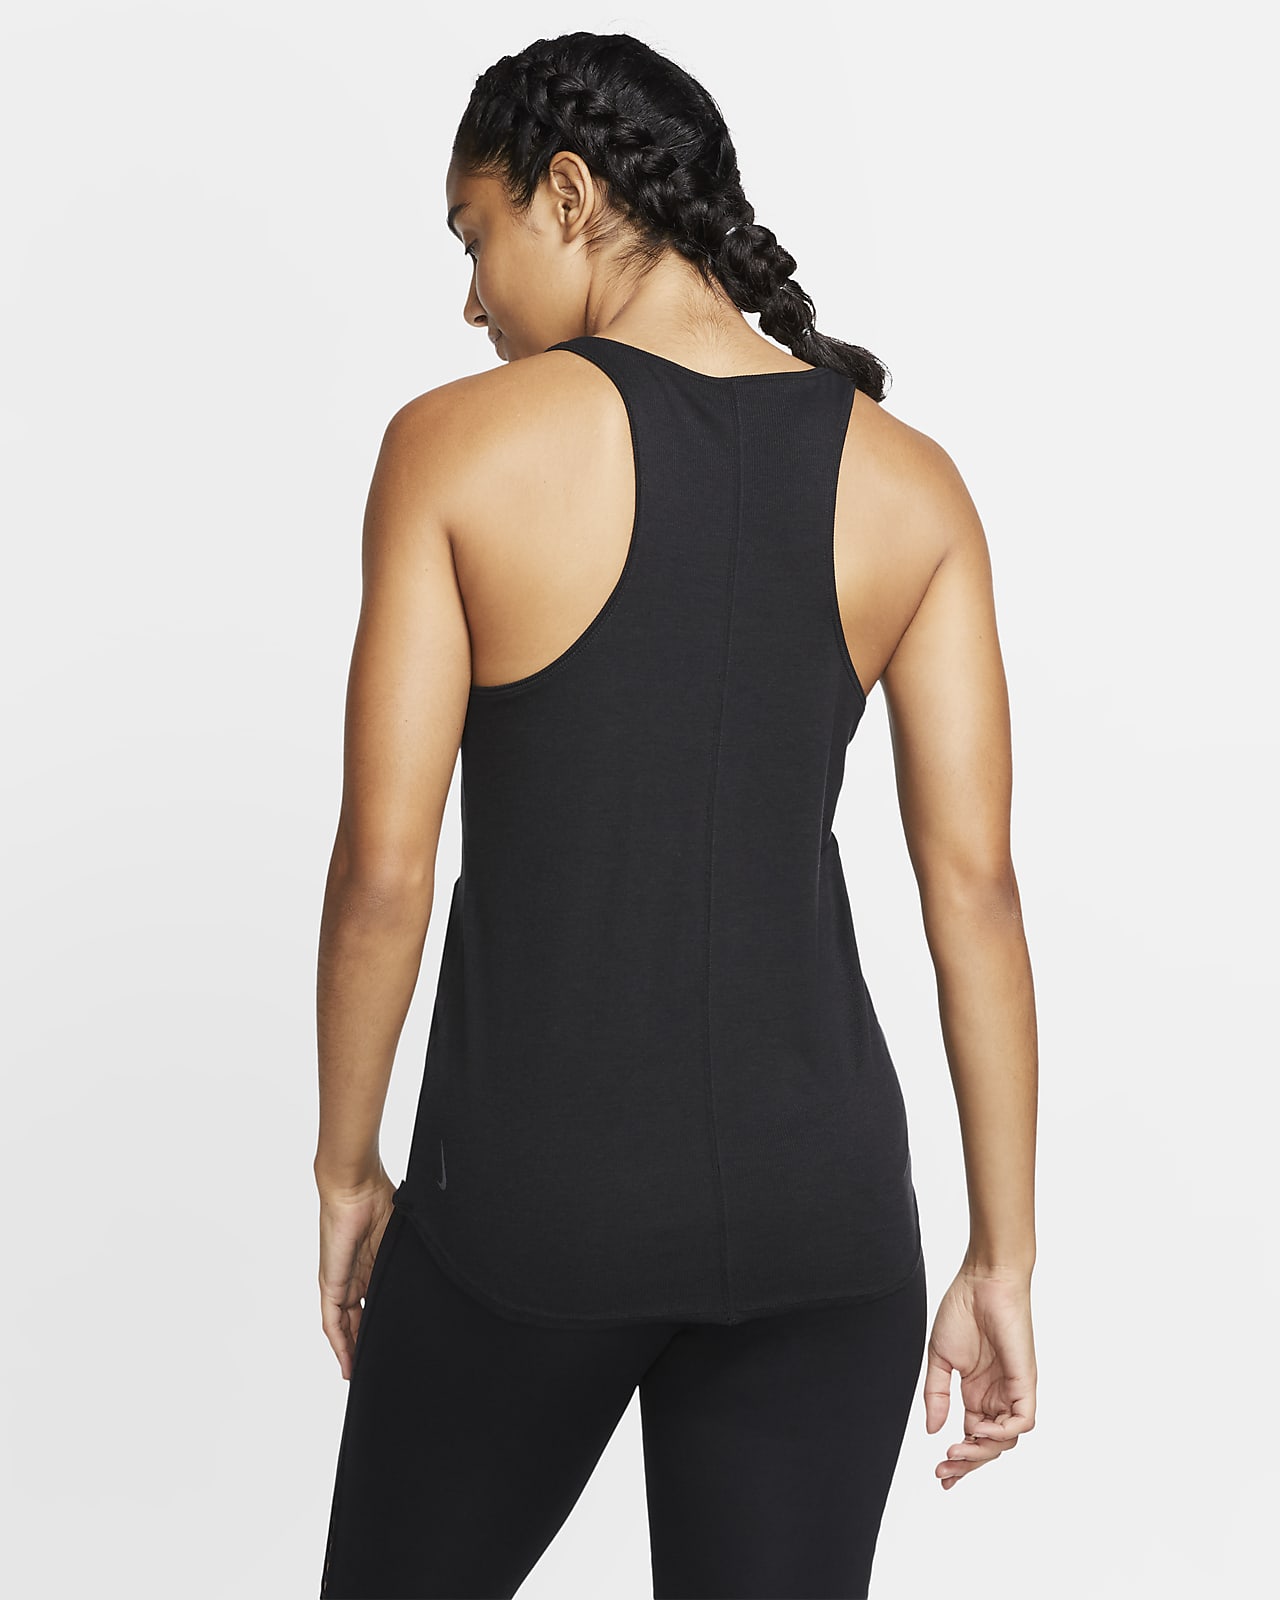 Nike the yoga luxe tank, tops and shirts, Training